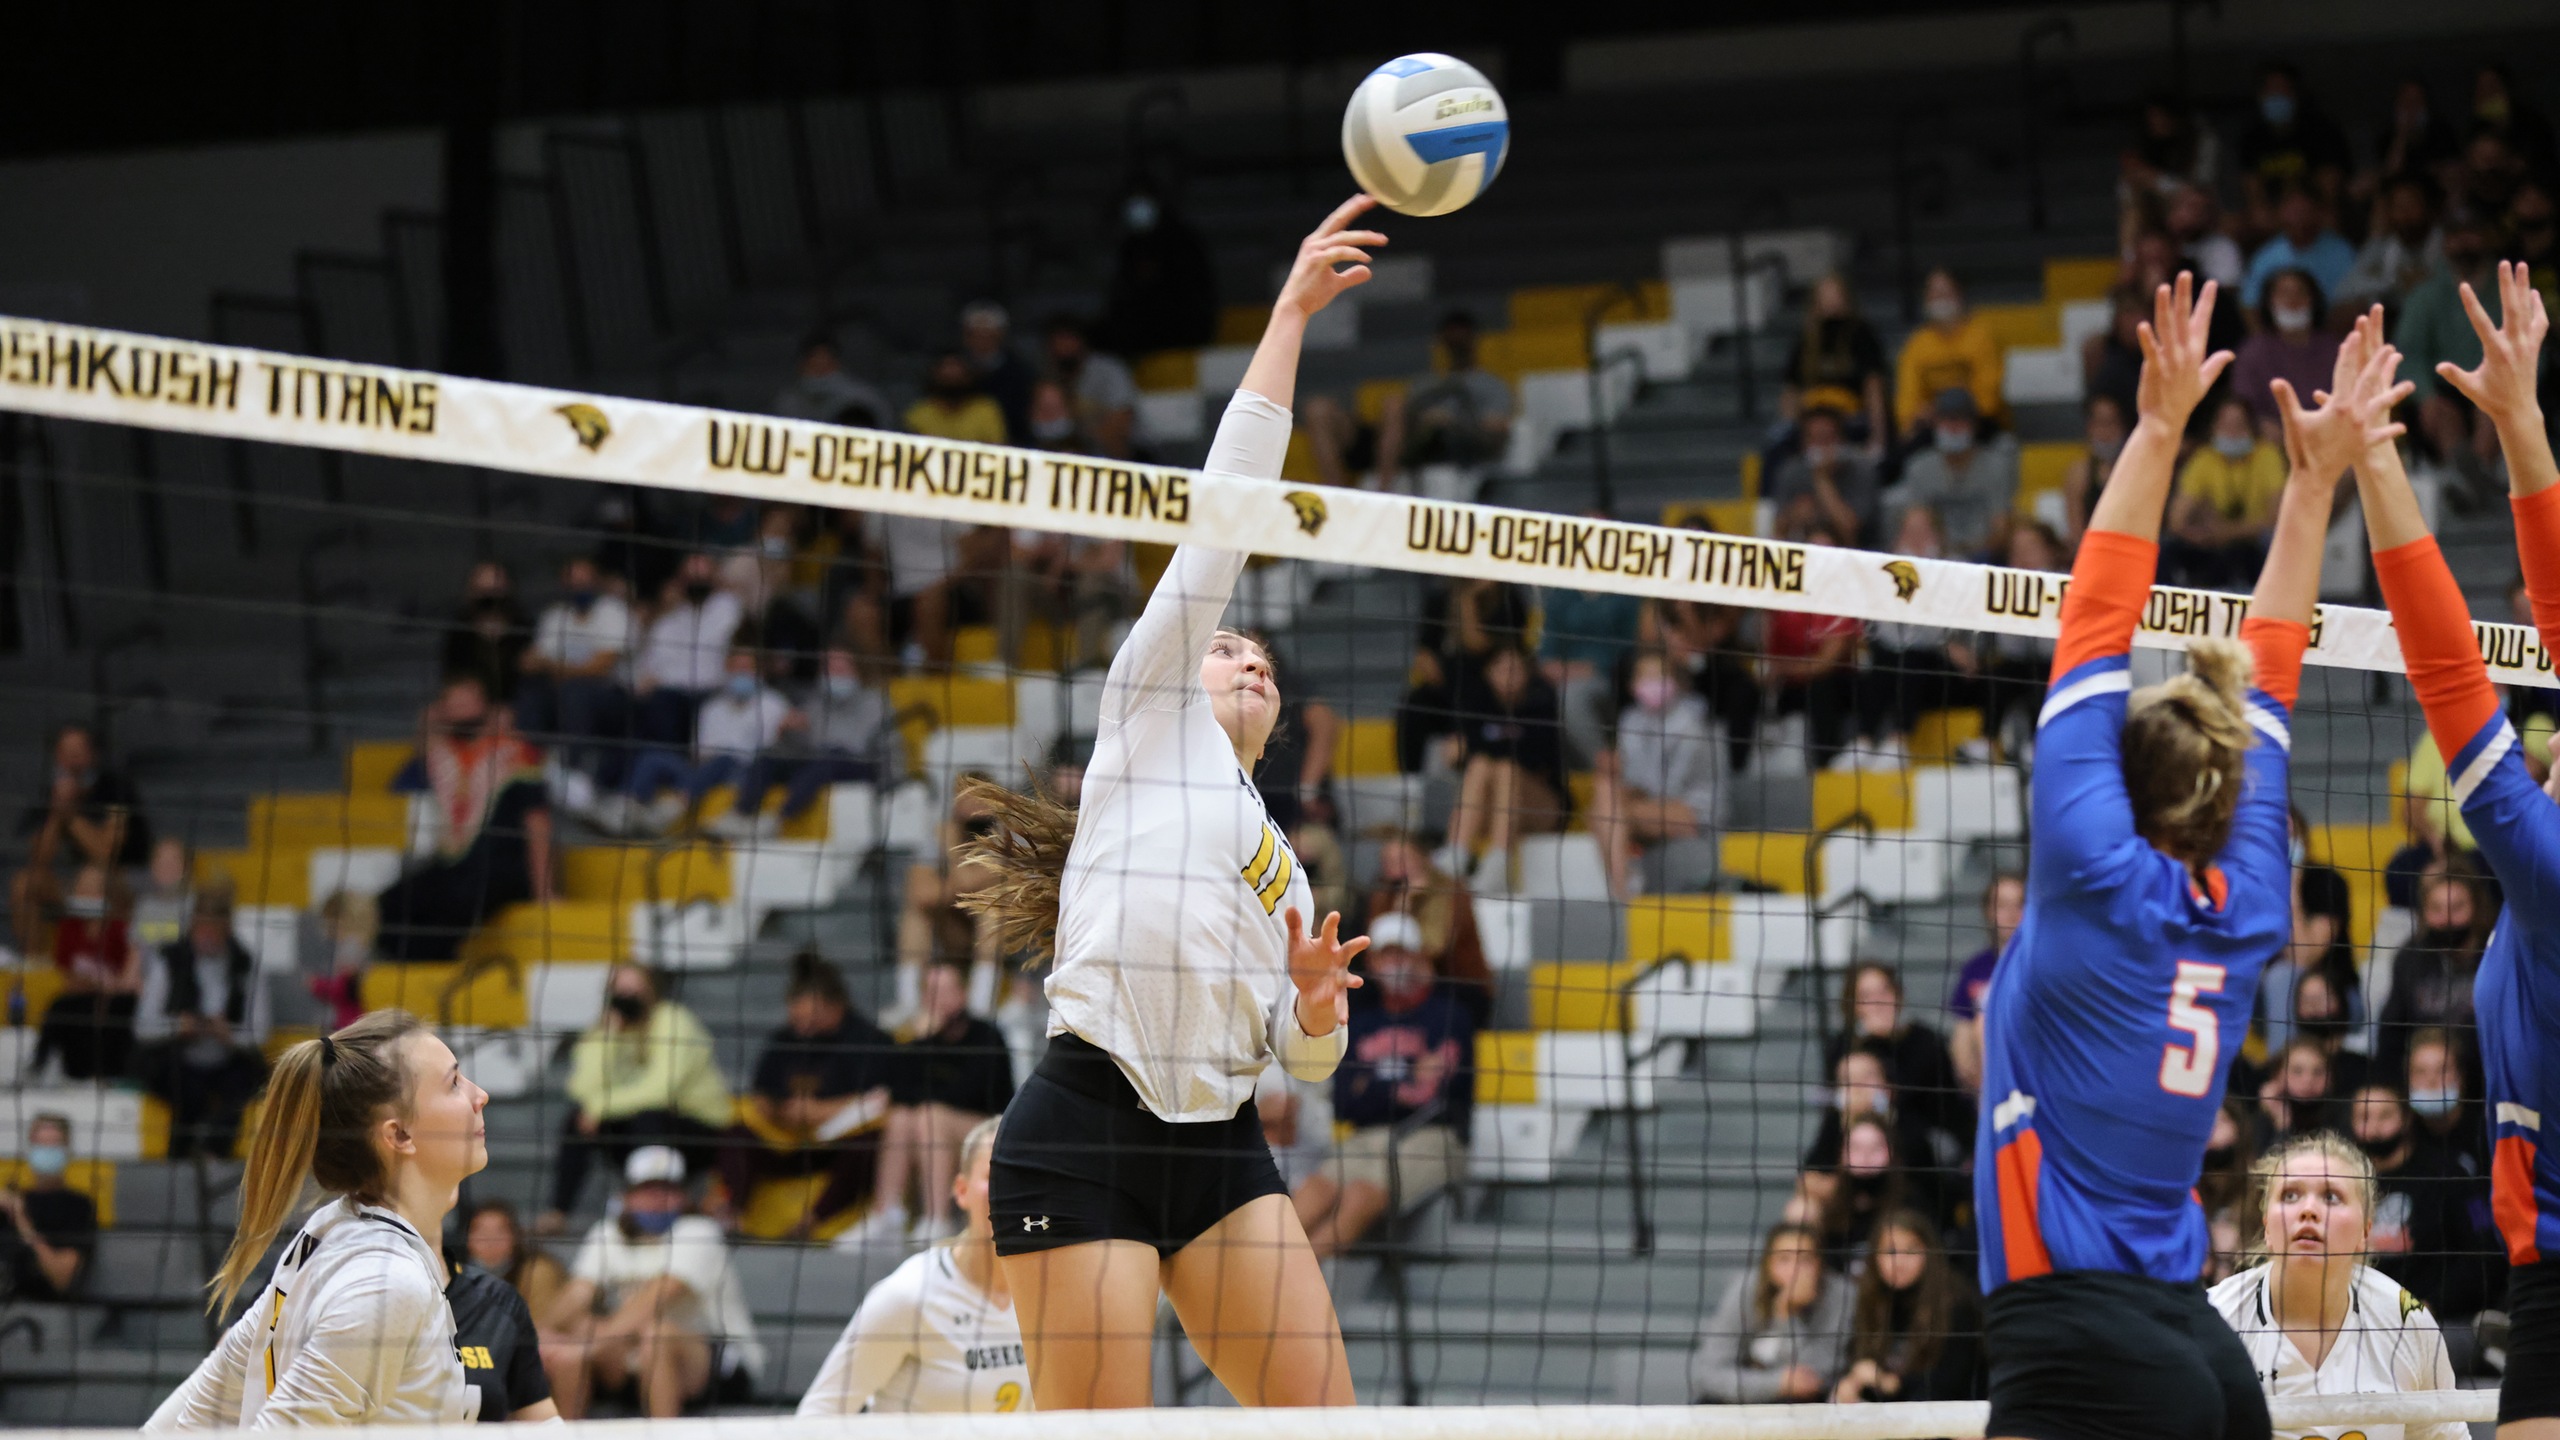 Riley Kindt recorded 26 kills during UW-Oshkosh's two matches against its CCIW opponents.